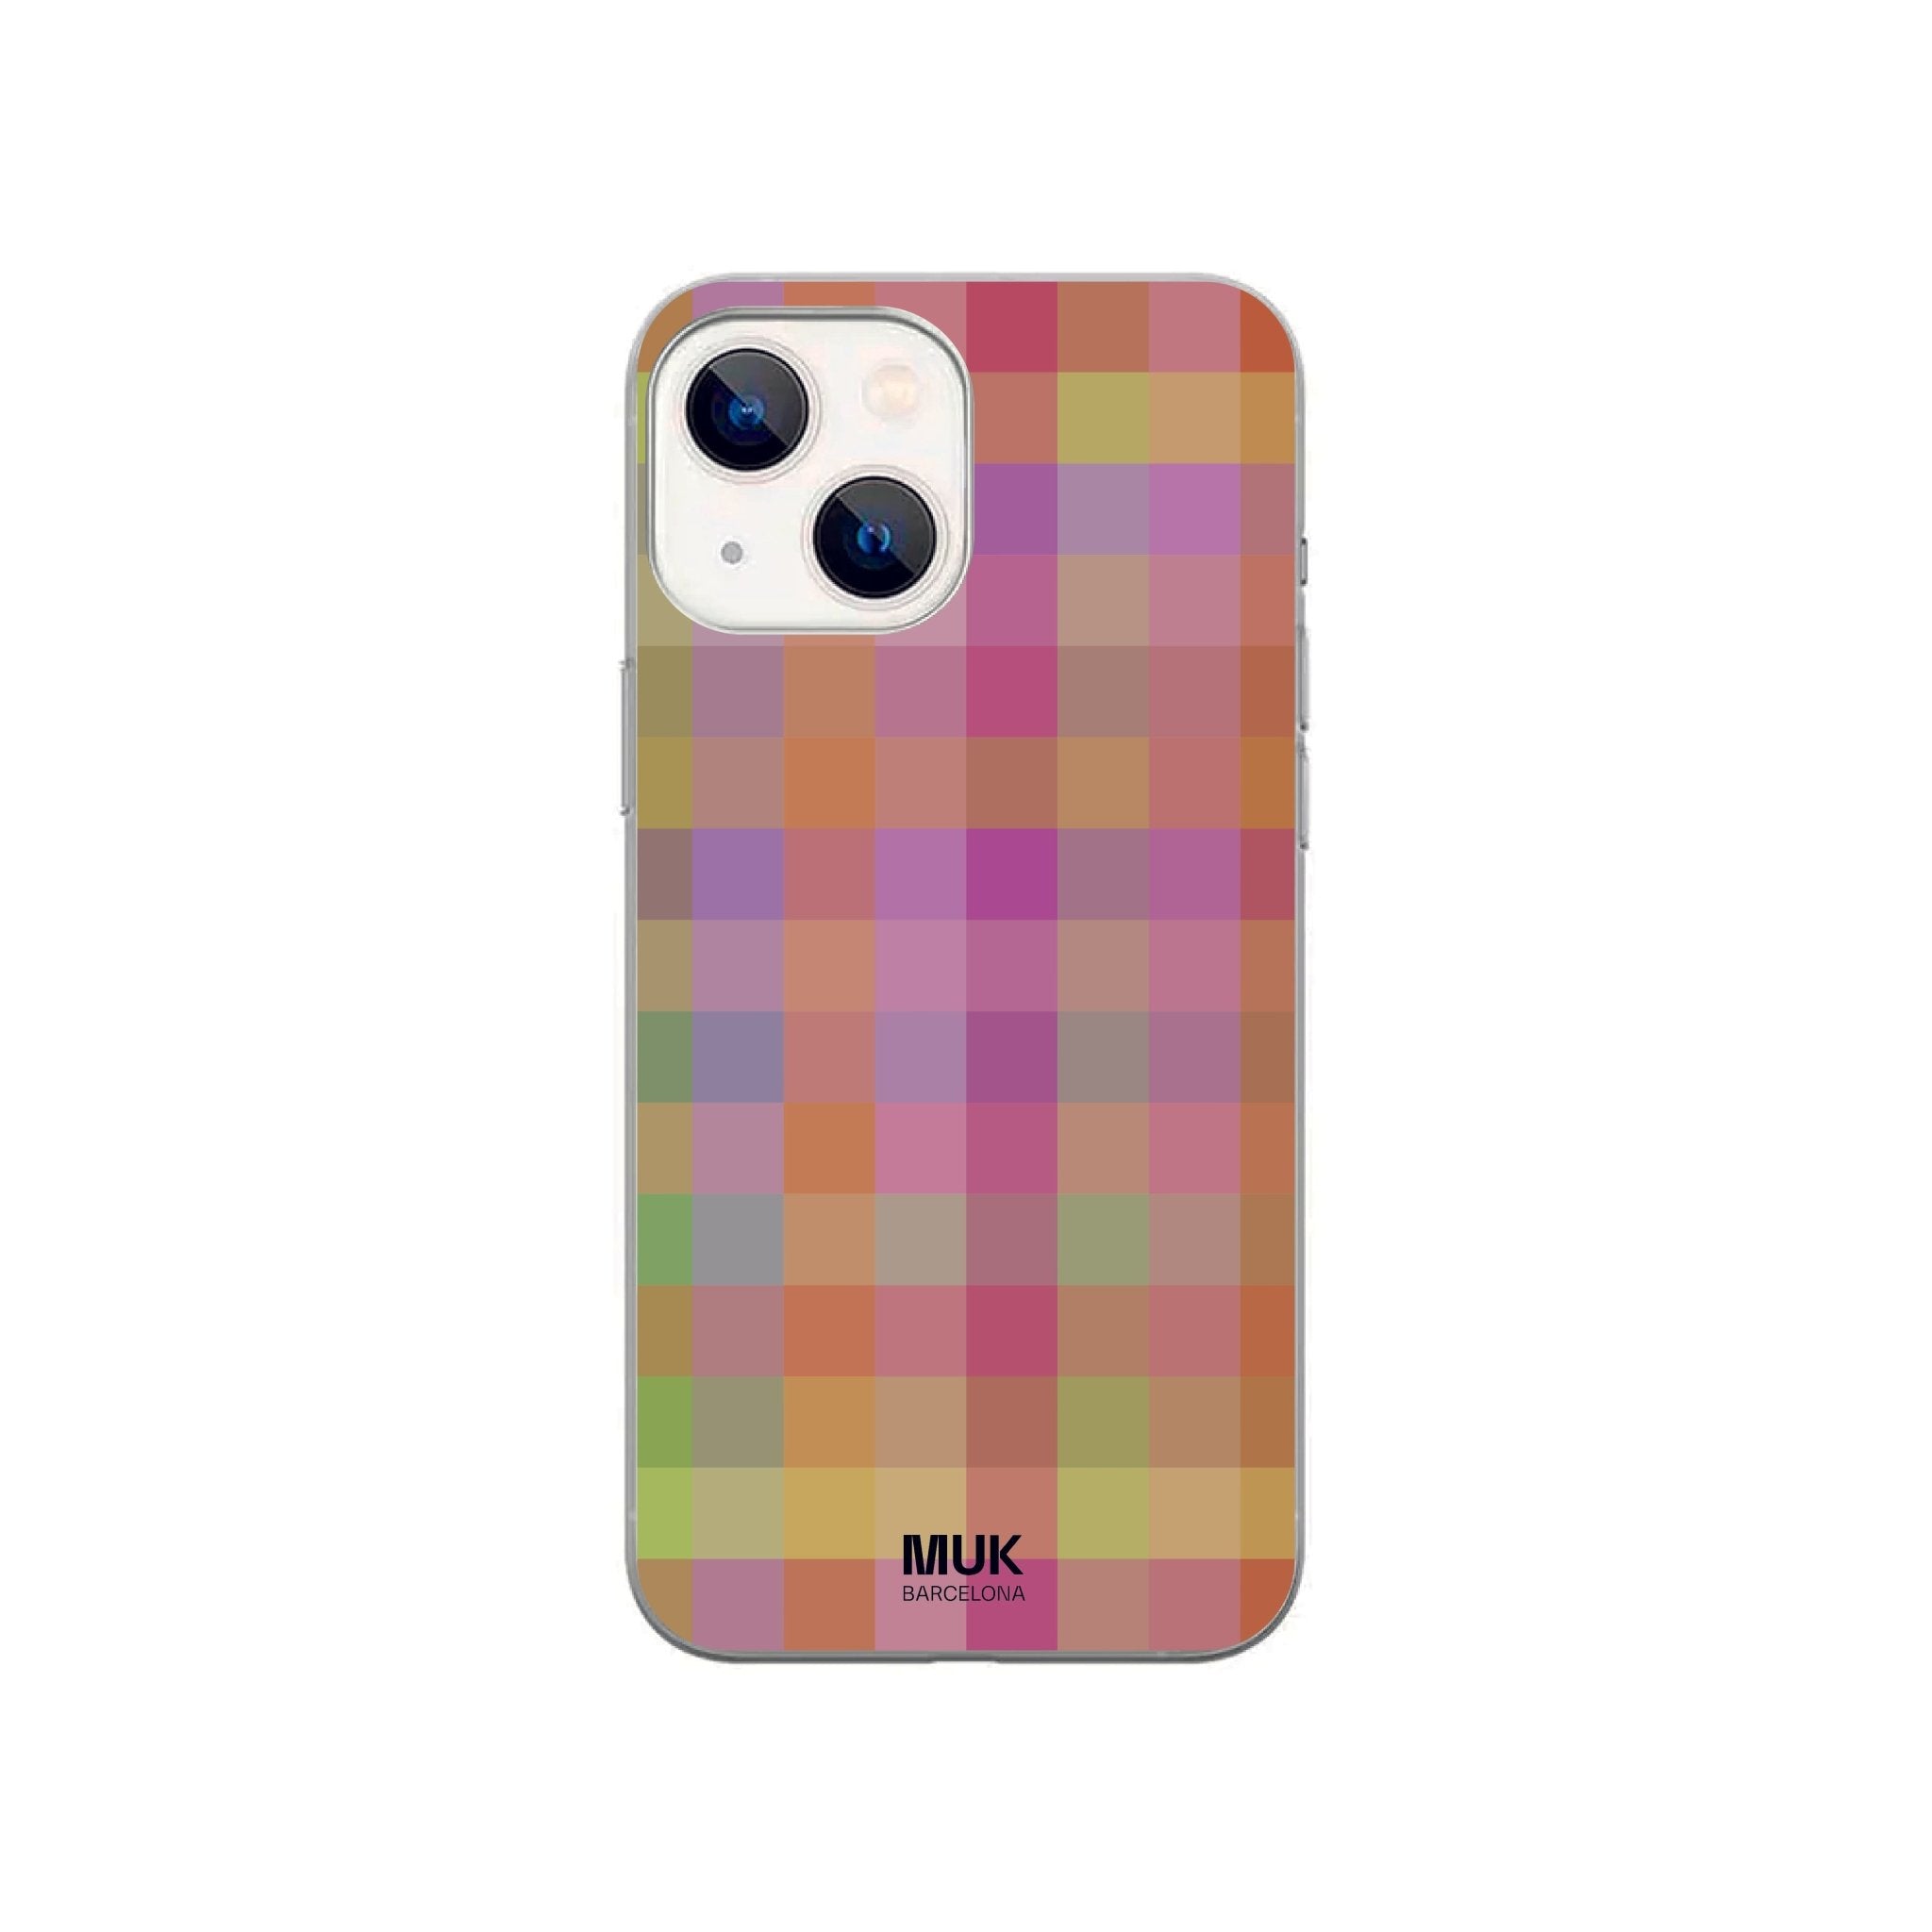 Clear Phone case with a pattern on it
